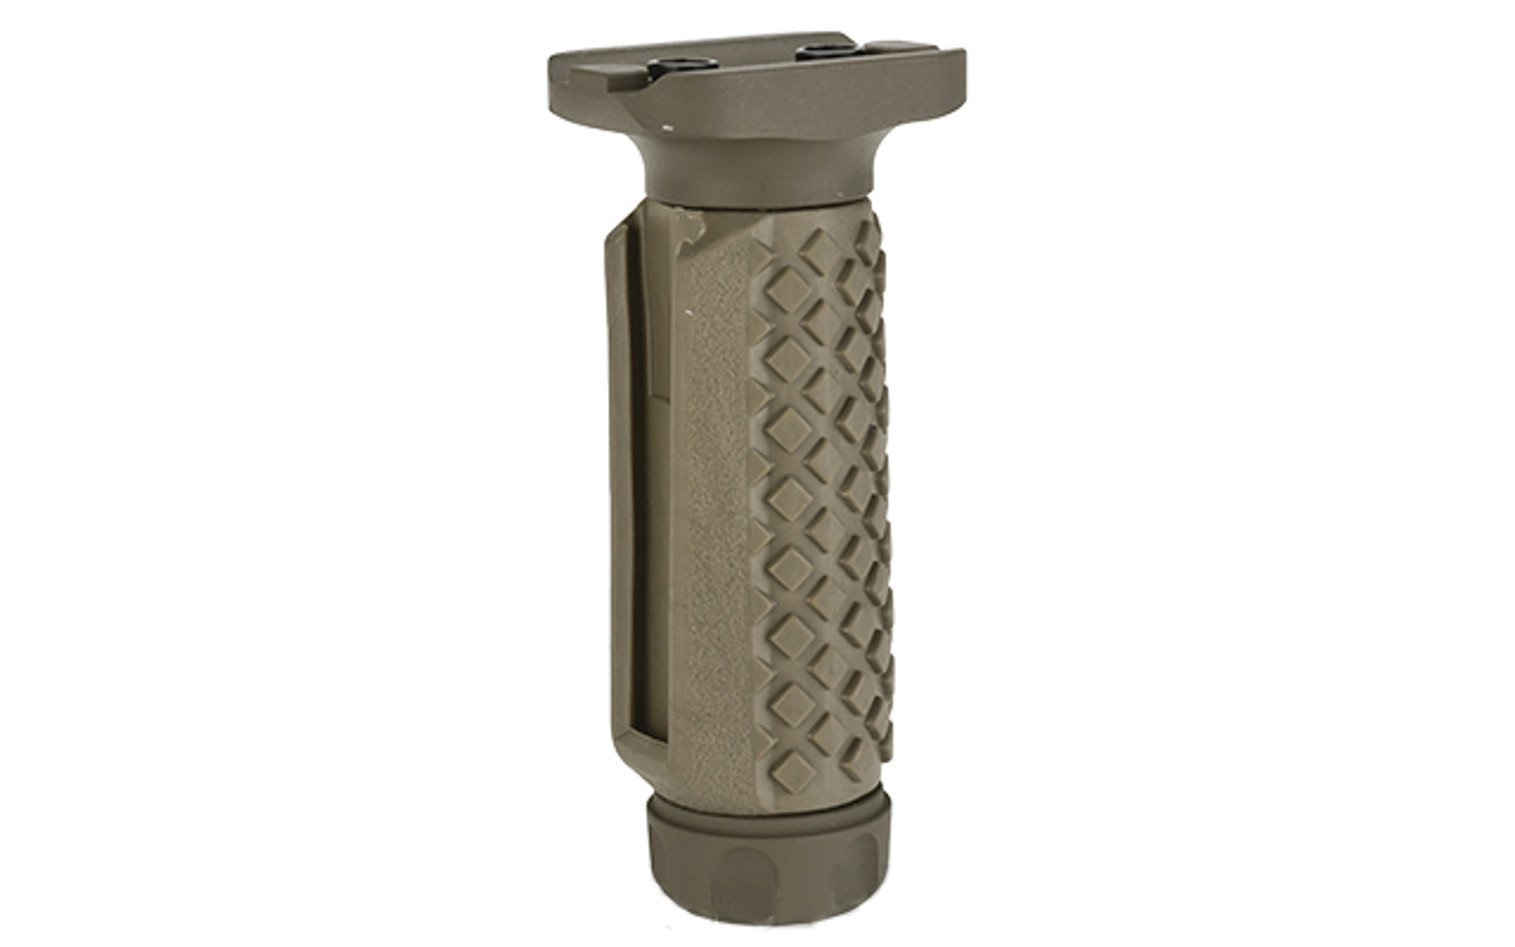 G&P Keymod Tactical Remote Switch Aluminum / Rubber Vertical Grip - Sand (Long)